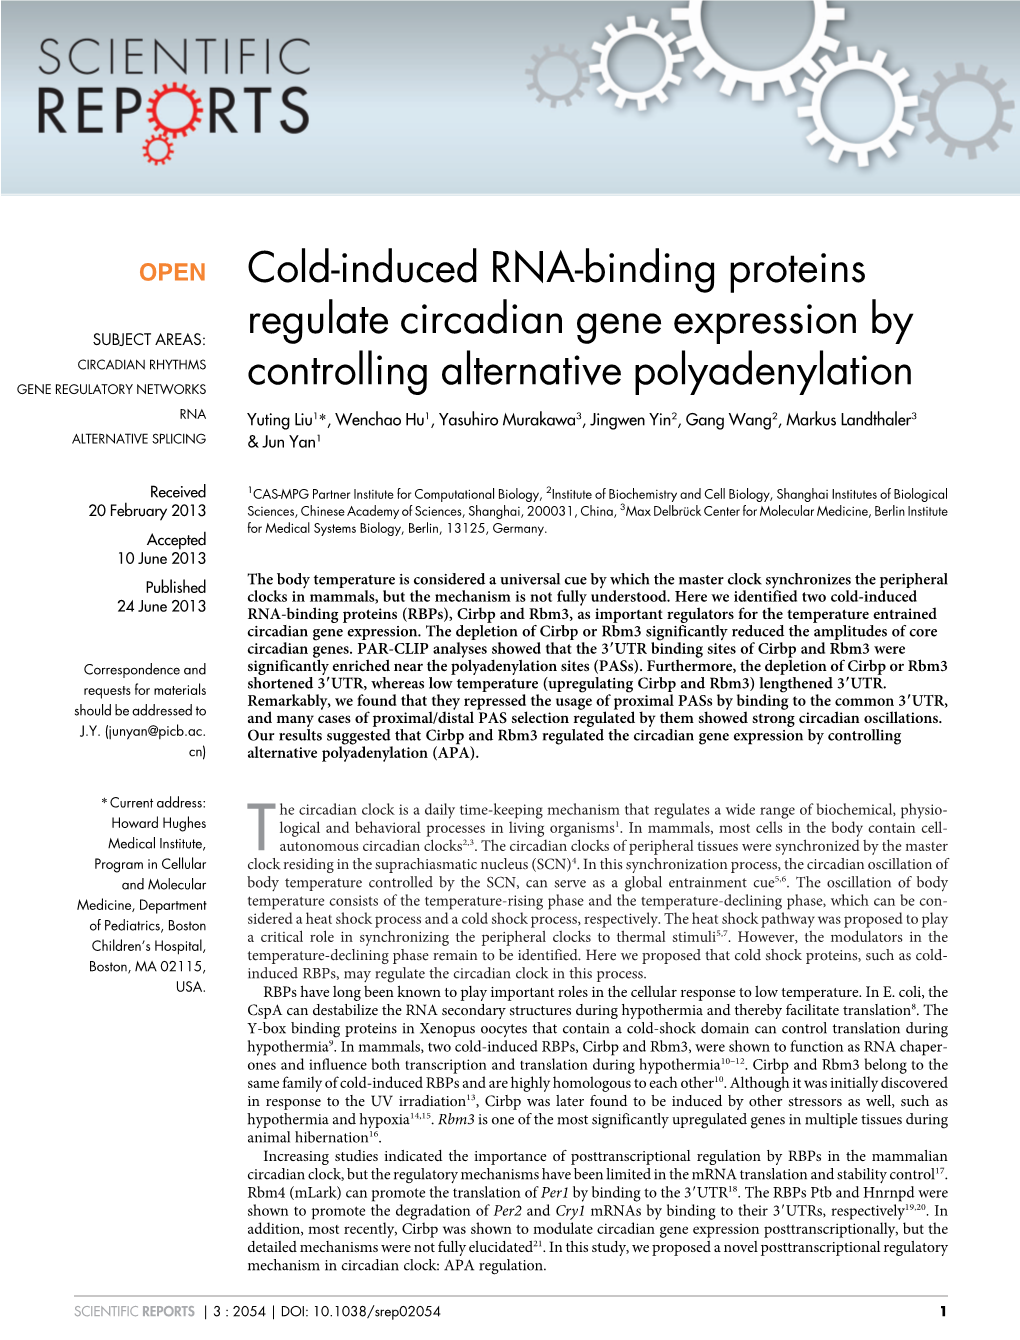 Cold-Induced RNA-Binding Proteins Regulate Circadian Gene Expression